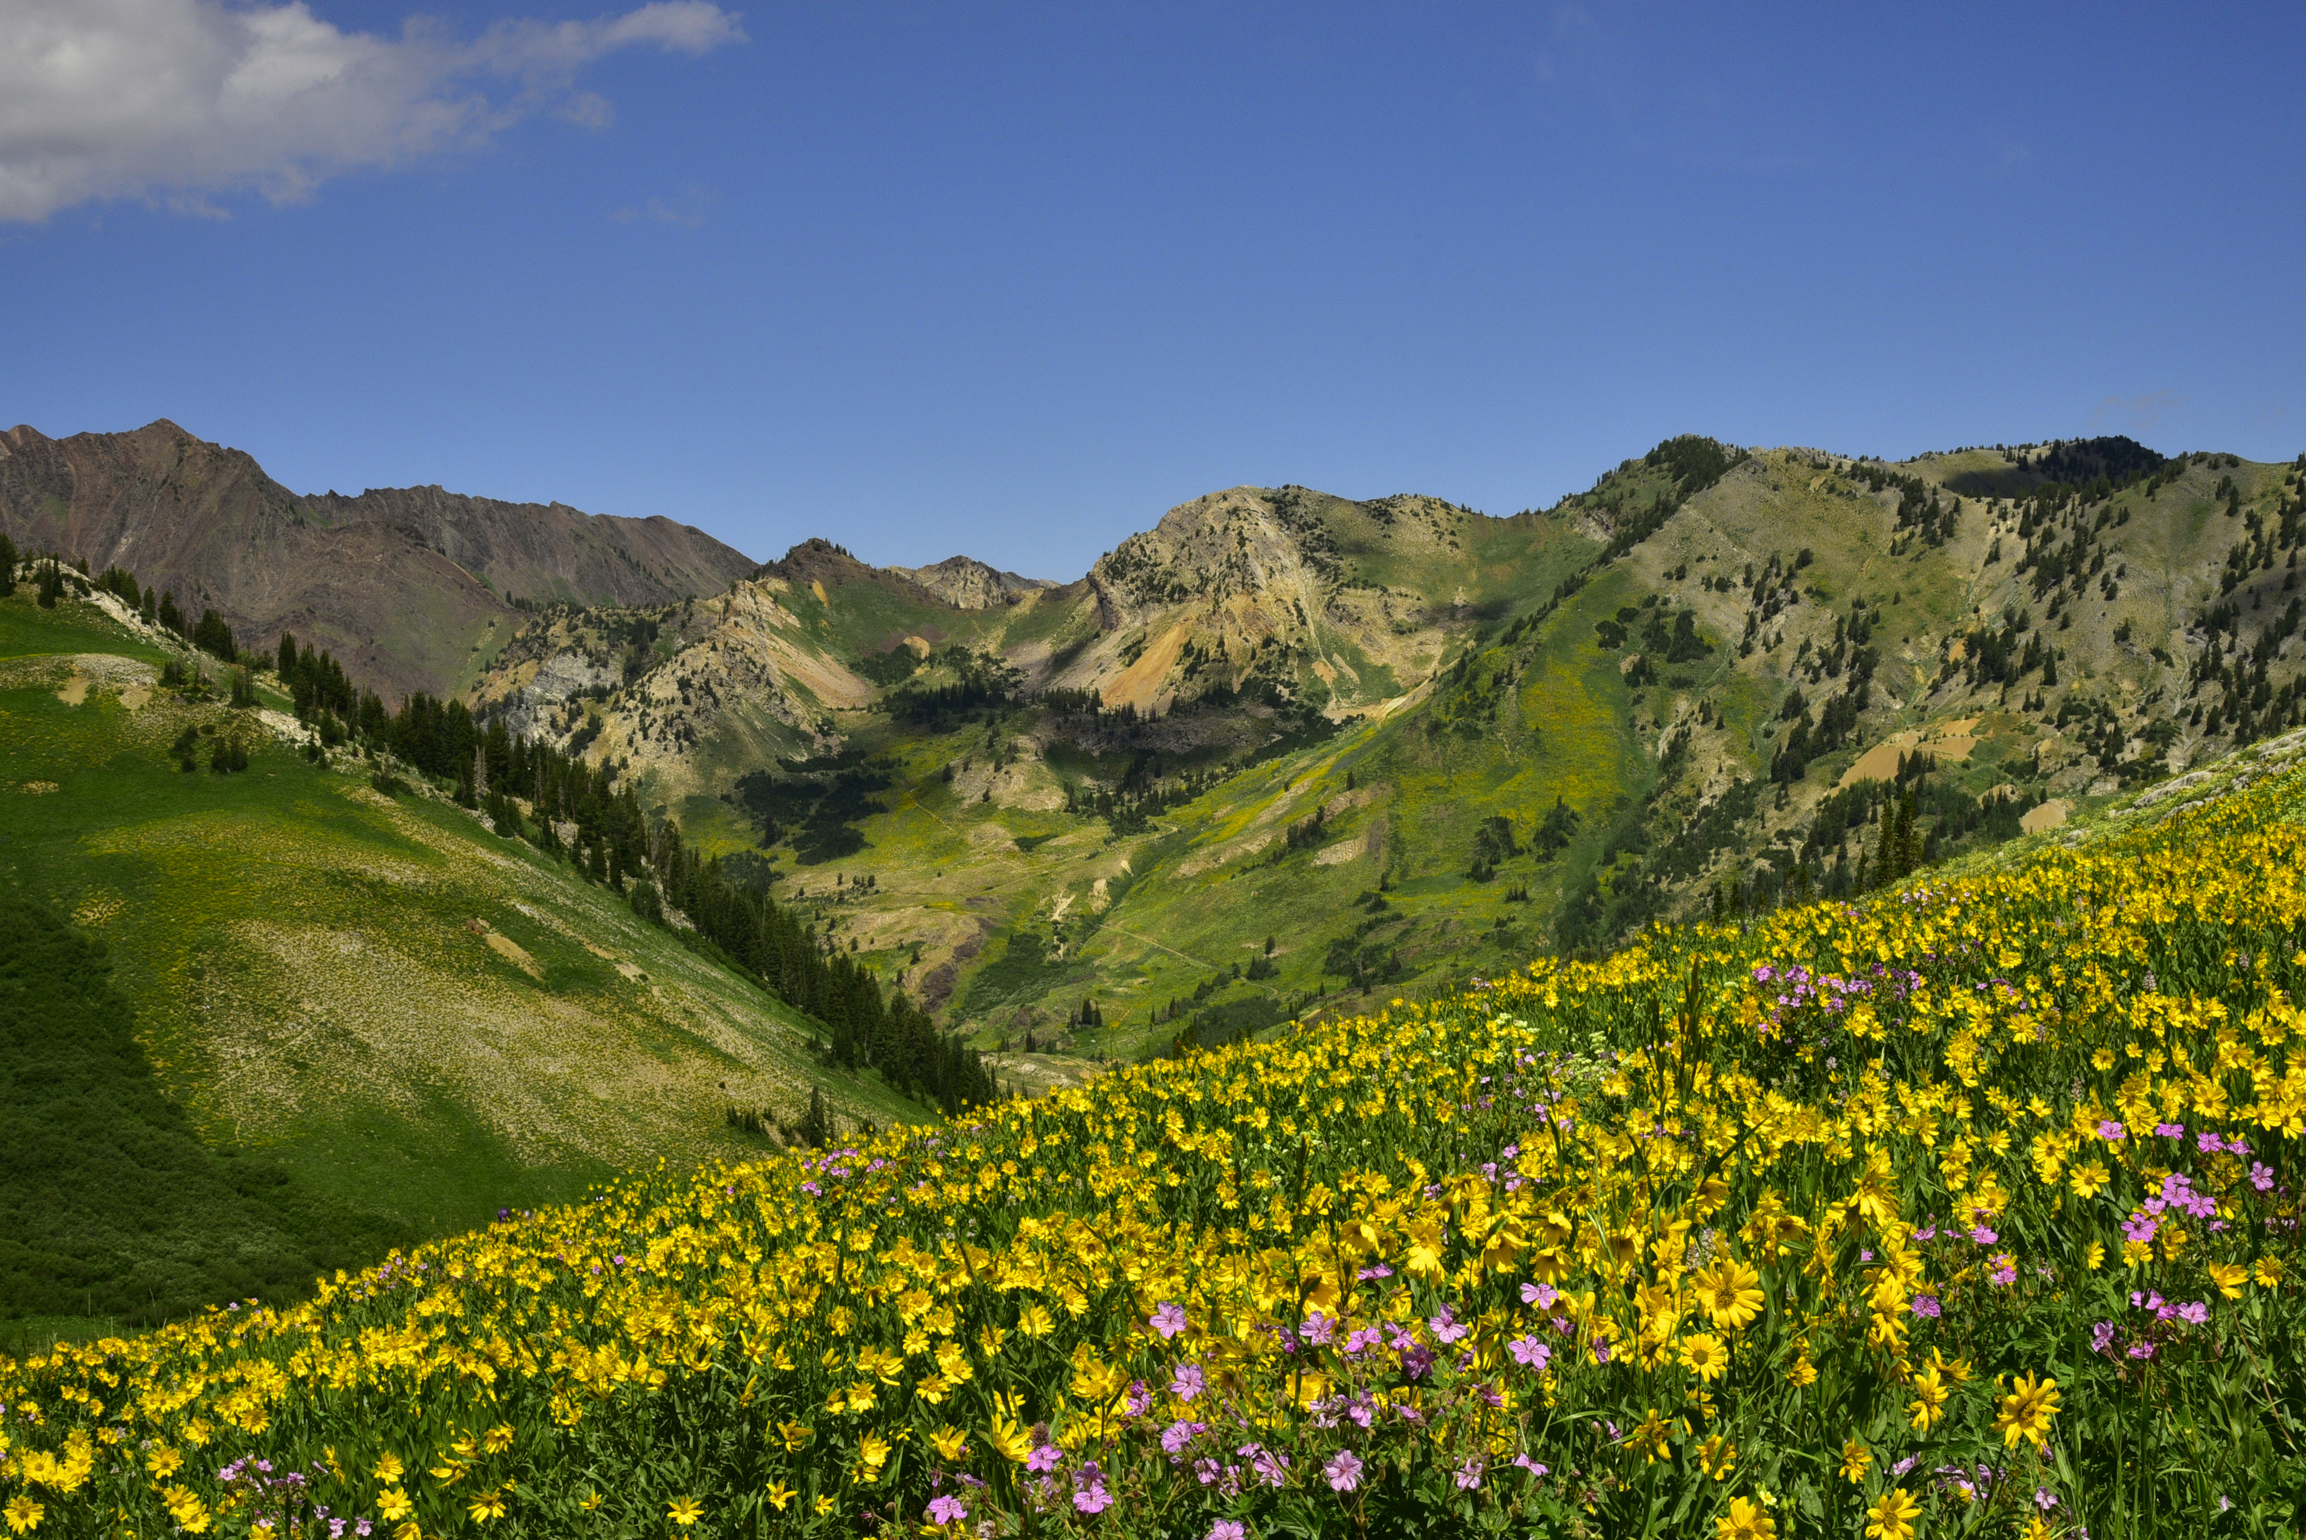 Wildflowers  -  Albion Meadow, Uinta-Wasatch-Cache National Forest, Utah